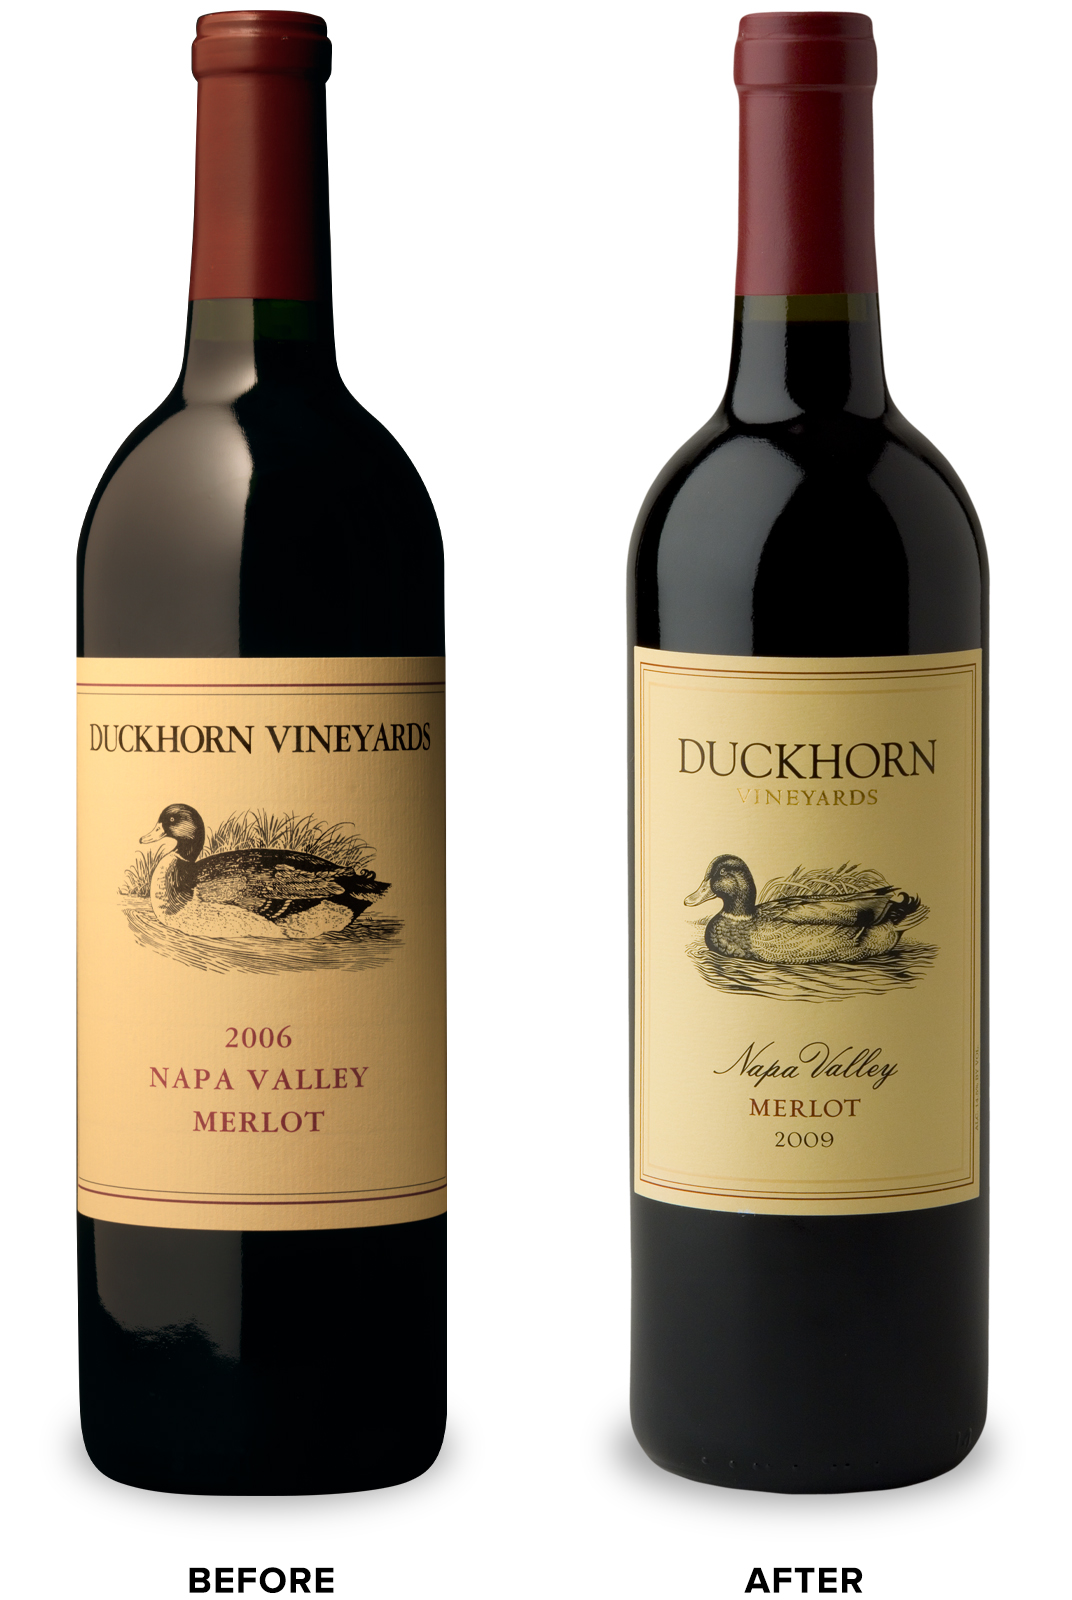 Duckhorn Vineyards Wine Packaging Before Redesign on Left & After on Right